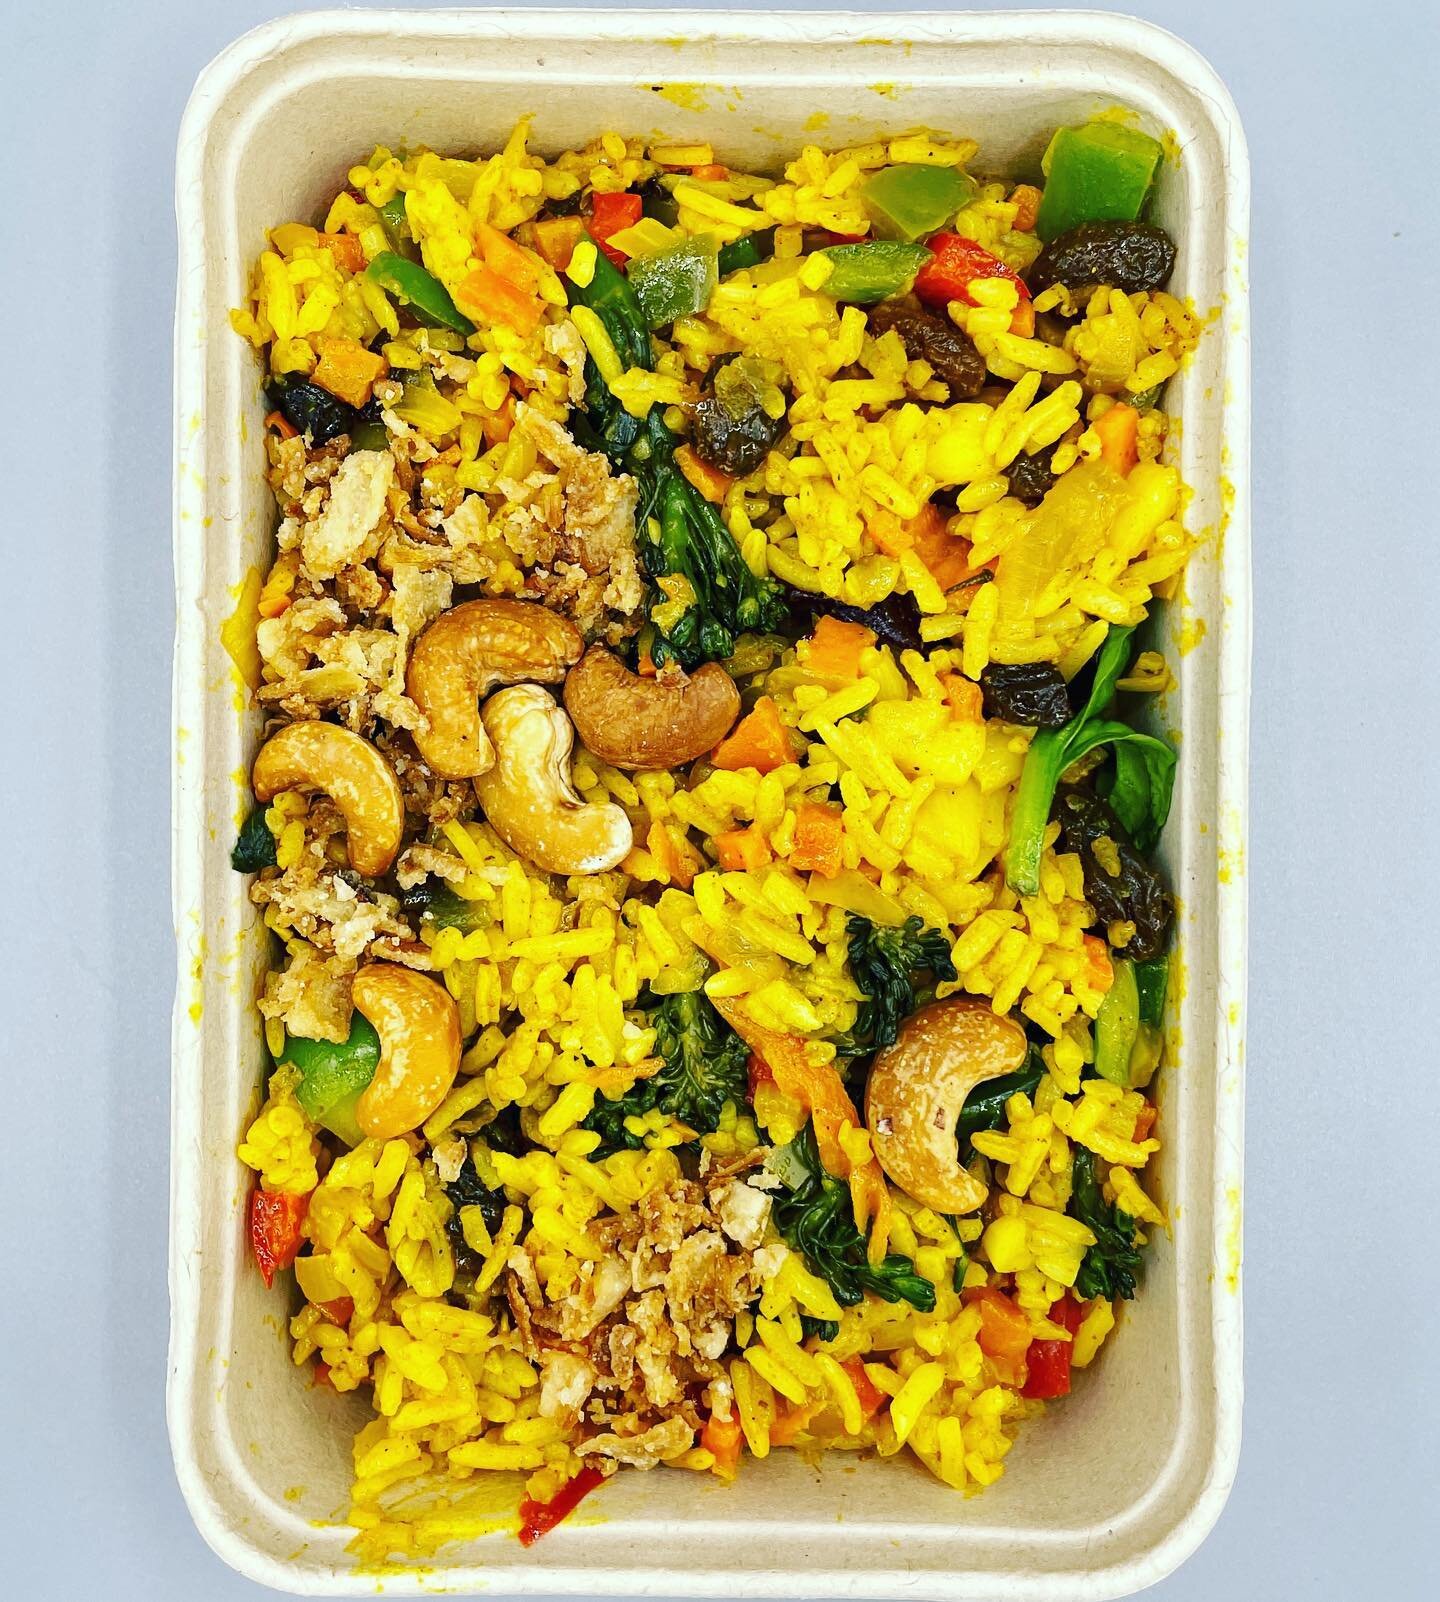 Pineapple fried rice 🌾 
The LDN fit club favourite Thai pineapple fried rice! 
|
|
|
|
|
|
|
|
|
|
|
|

#friedrice #foodie #food #foodporn #foodphotography #foodstagram #chinesefood #instafood #chicken #rice #foodblogger #foodlover #yummy #delicious